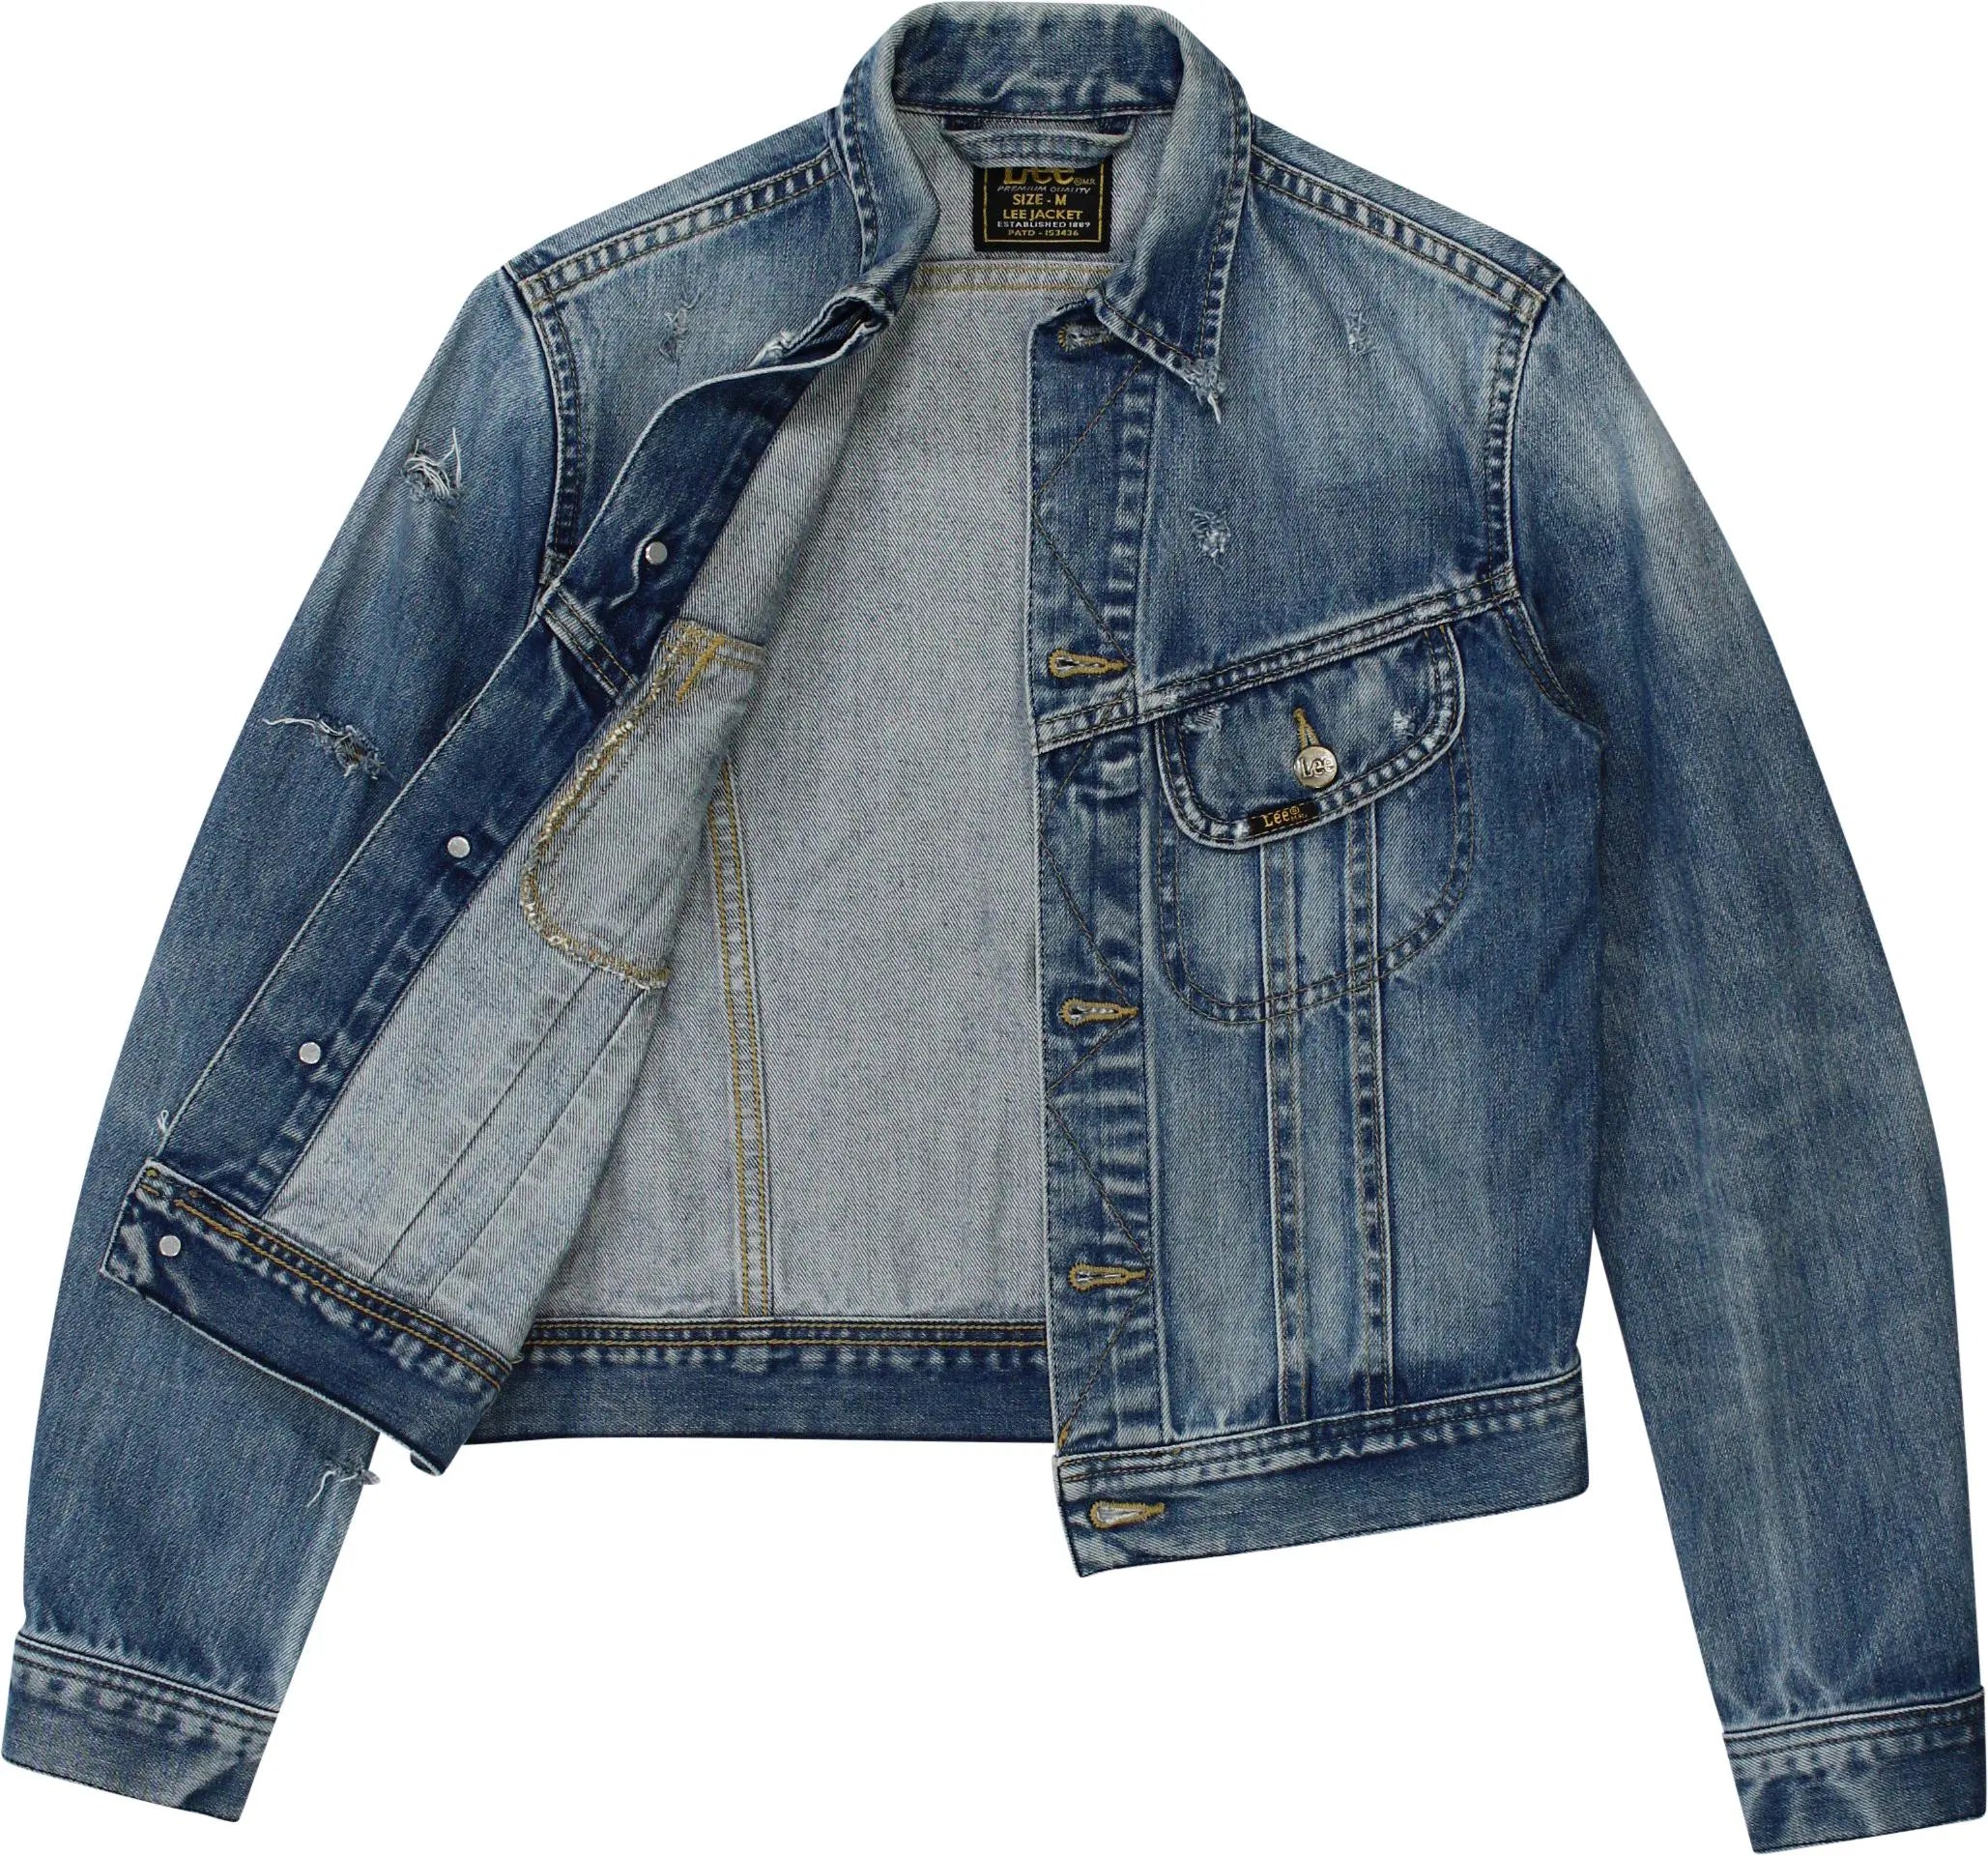 Lee - Ripped Denim Jacket by Lee- ThriftTale.com - Vintage and second handclothing